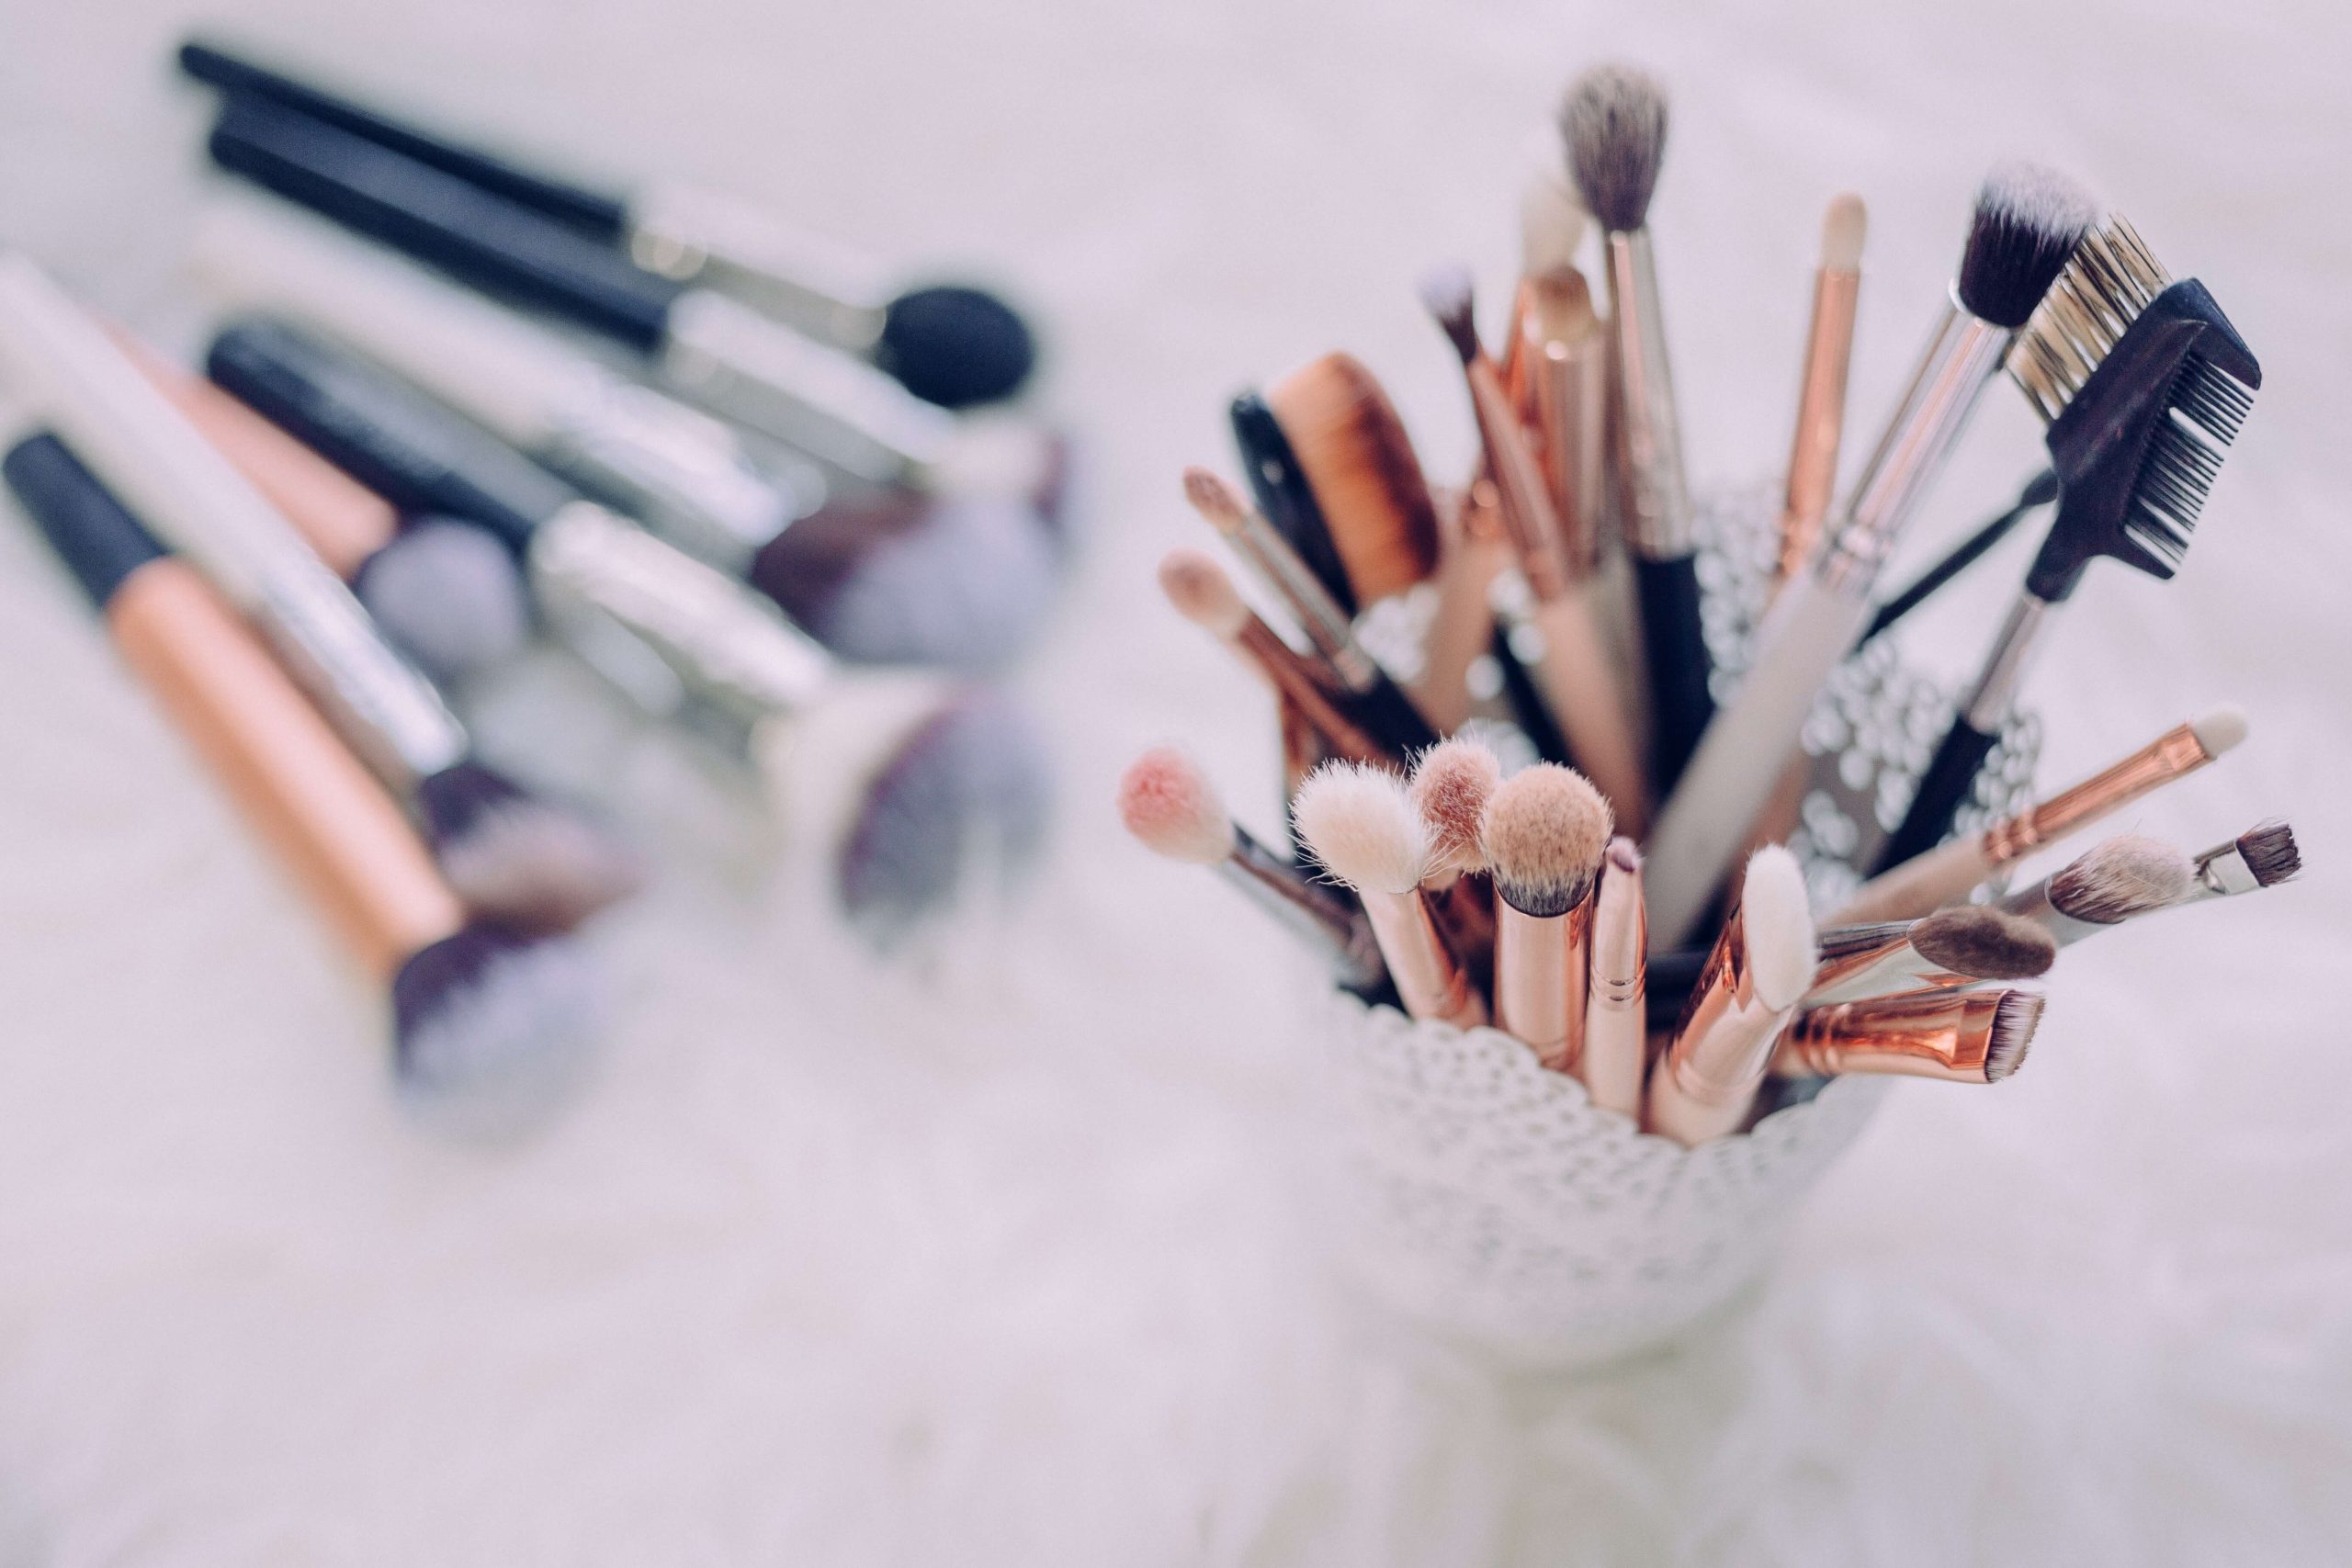 Different Types of Makeup Brushes A Complete Guide (3) different types of makeup brushes - Different Types of Makeup Brushes A Complete Guide 3 scaled - Different Types of Makeup Brushes: A Complete Guide